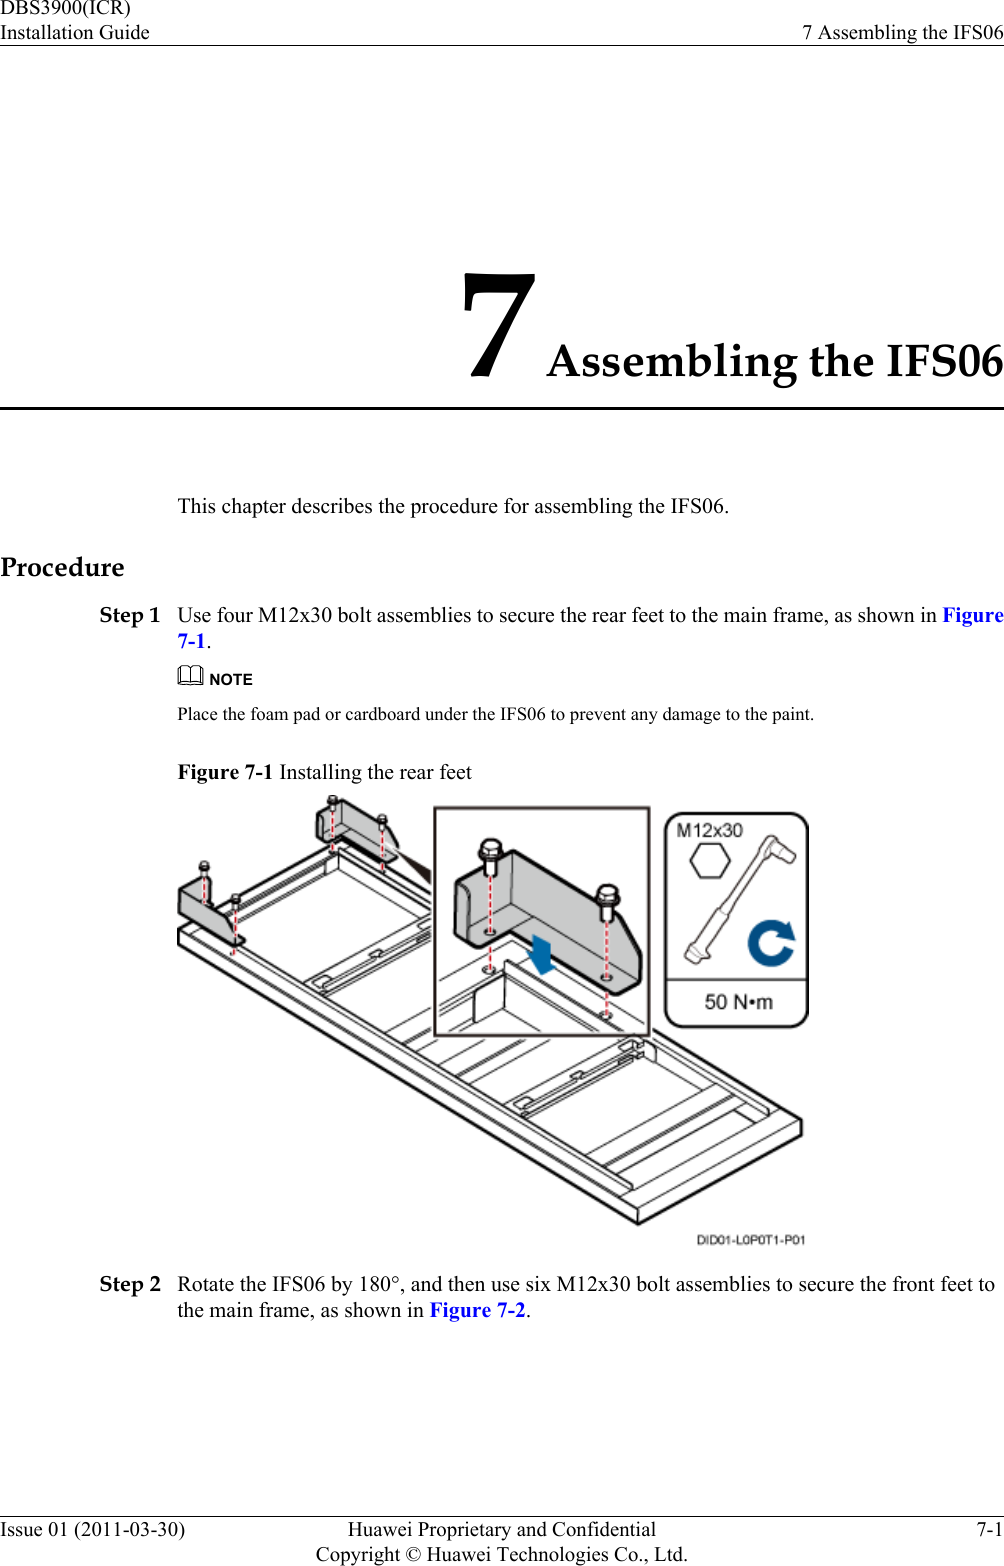 7 Assembling the IFS06This chapter describes the procedure for assembling the IFS06.ProcedureStep 1 Use four M12x30 bolt assemblies to secure the rear feet to the main frame, as shown in Figure7-1.NOTEPlace the foam pad or cardboard under the IFS06 to prevent any damage to the paint.Figure 7-1 Installing the rear feetStep 2 Rotate the IFS06 by 180°, and then use six M12x30 bolt assemblies to secure the front feet tothe main frame, as shown in Figure 7-2.DBS3900(ICR)Installation Guide 7 Assembling the IFS06Issue 01 (2011-03-30) Huawei Proprietary and ConfidentialCopyright © Huawei Technologies Co., Ltd.7-1